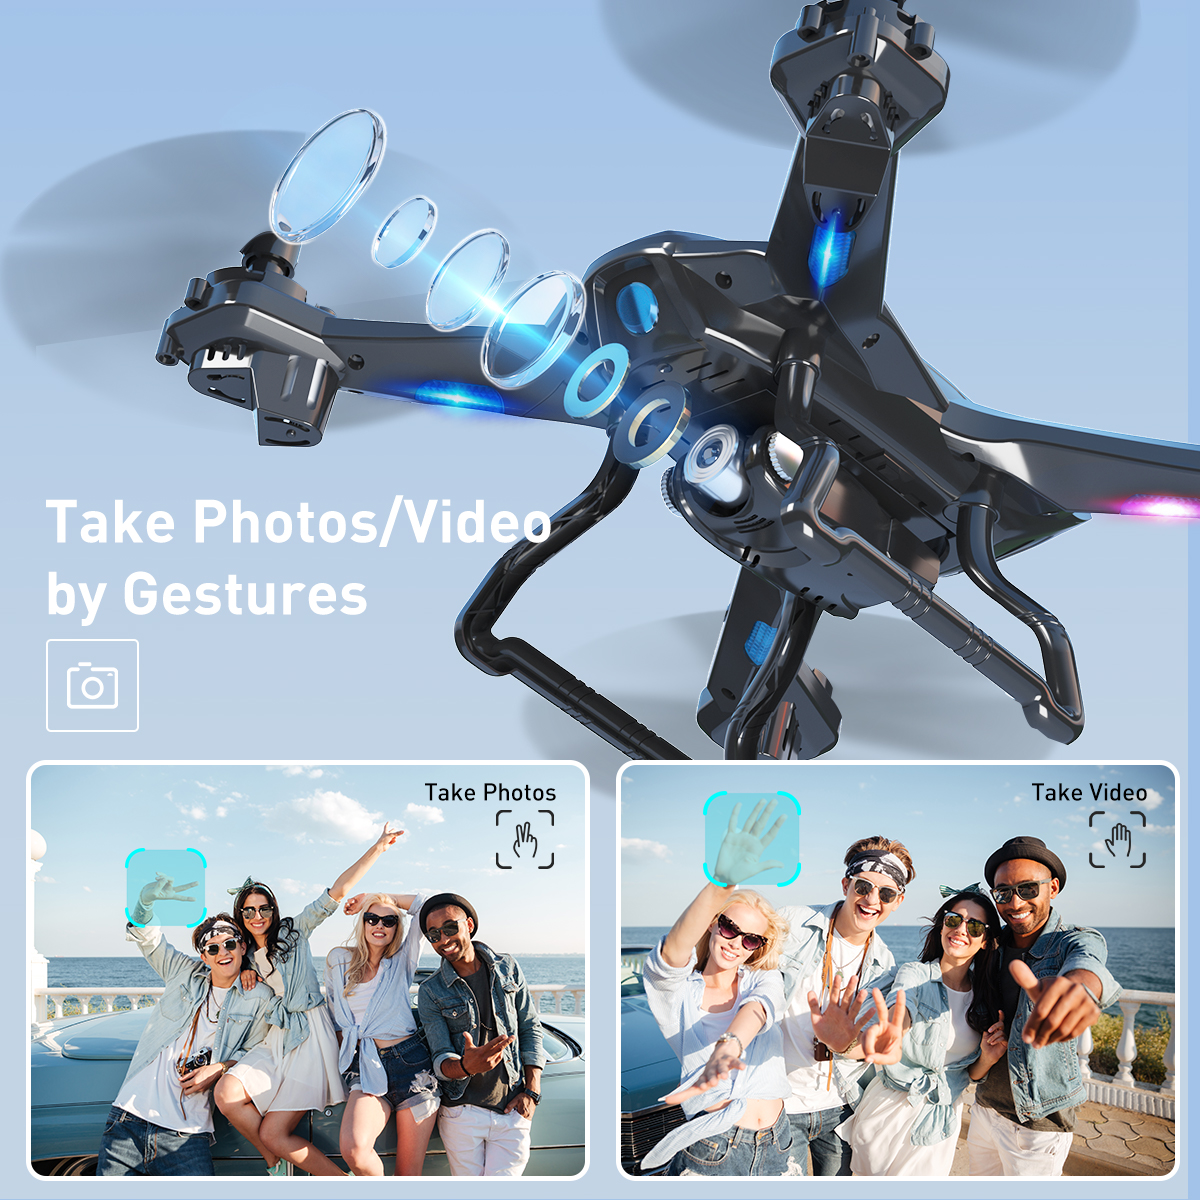 SNAPTAIN S5C WiFi FPV Drone with 1080P FHD Camera, Voice Control, Gesture Control RC Quadcopter for Beginners with Altitude Hold, Gravity Sensor, RTF One Key Take Off/Landing, Compatible w/VR Headset - image 3 of 9